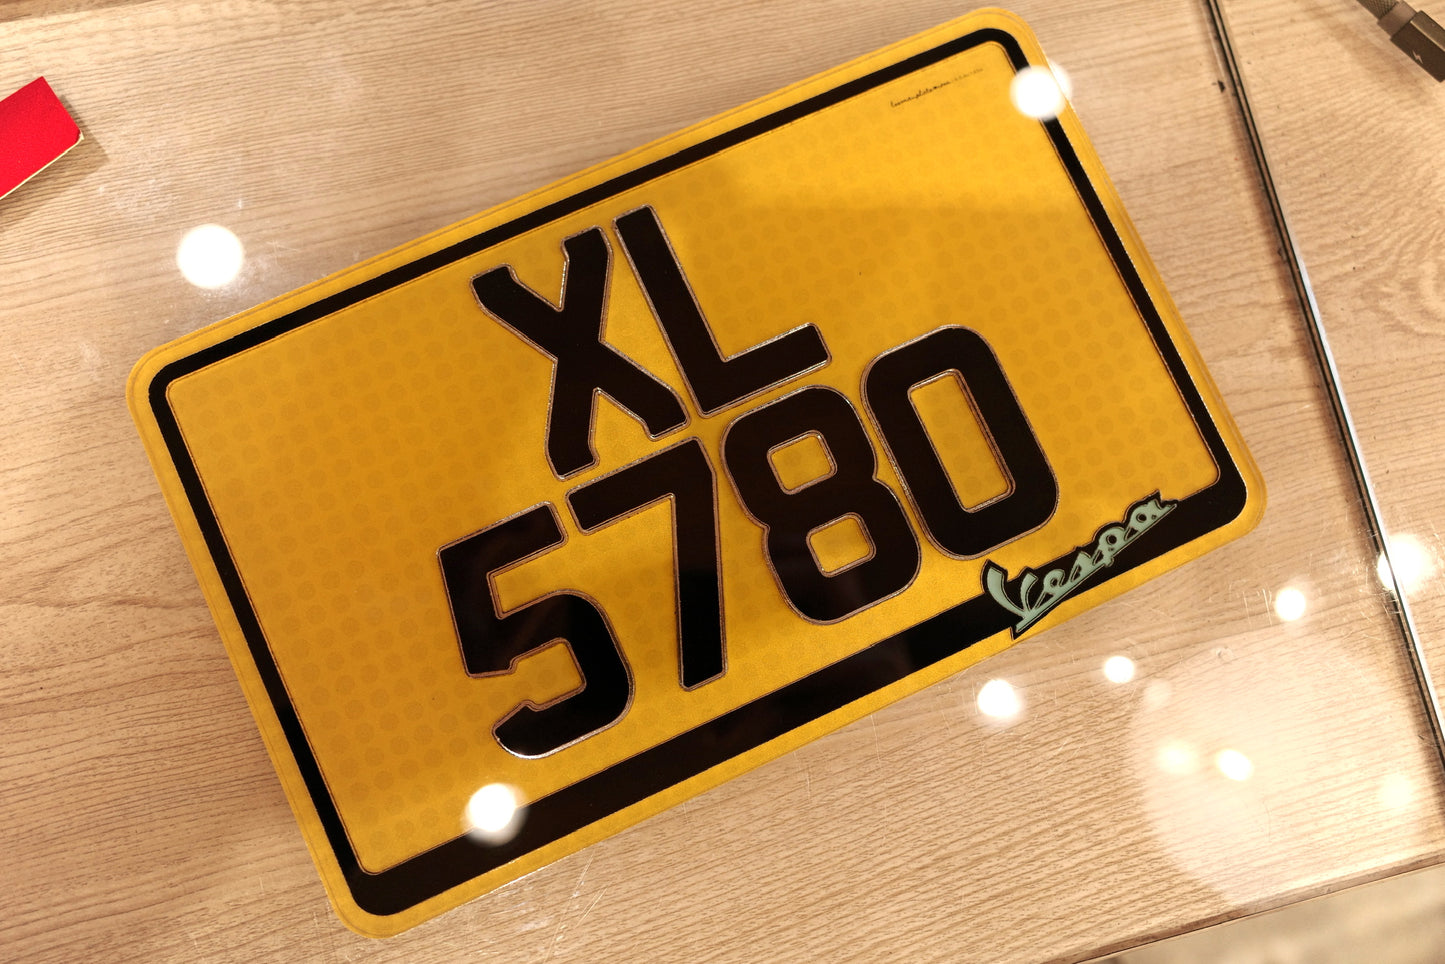 ENGRAVED PLATES - Engraved Series Motorcycle License Plates 